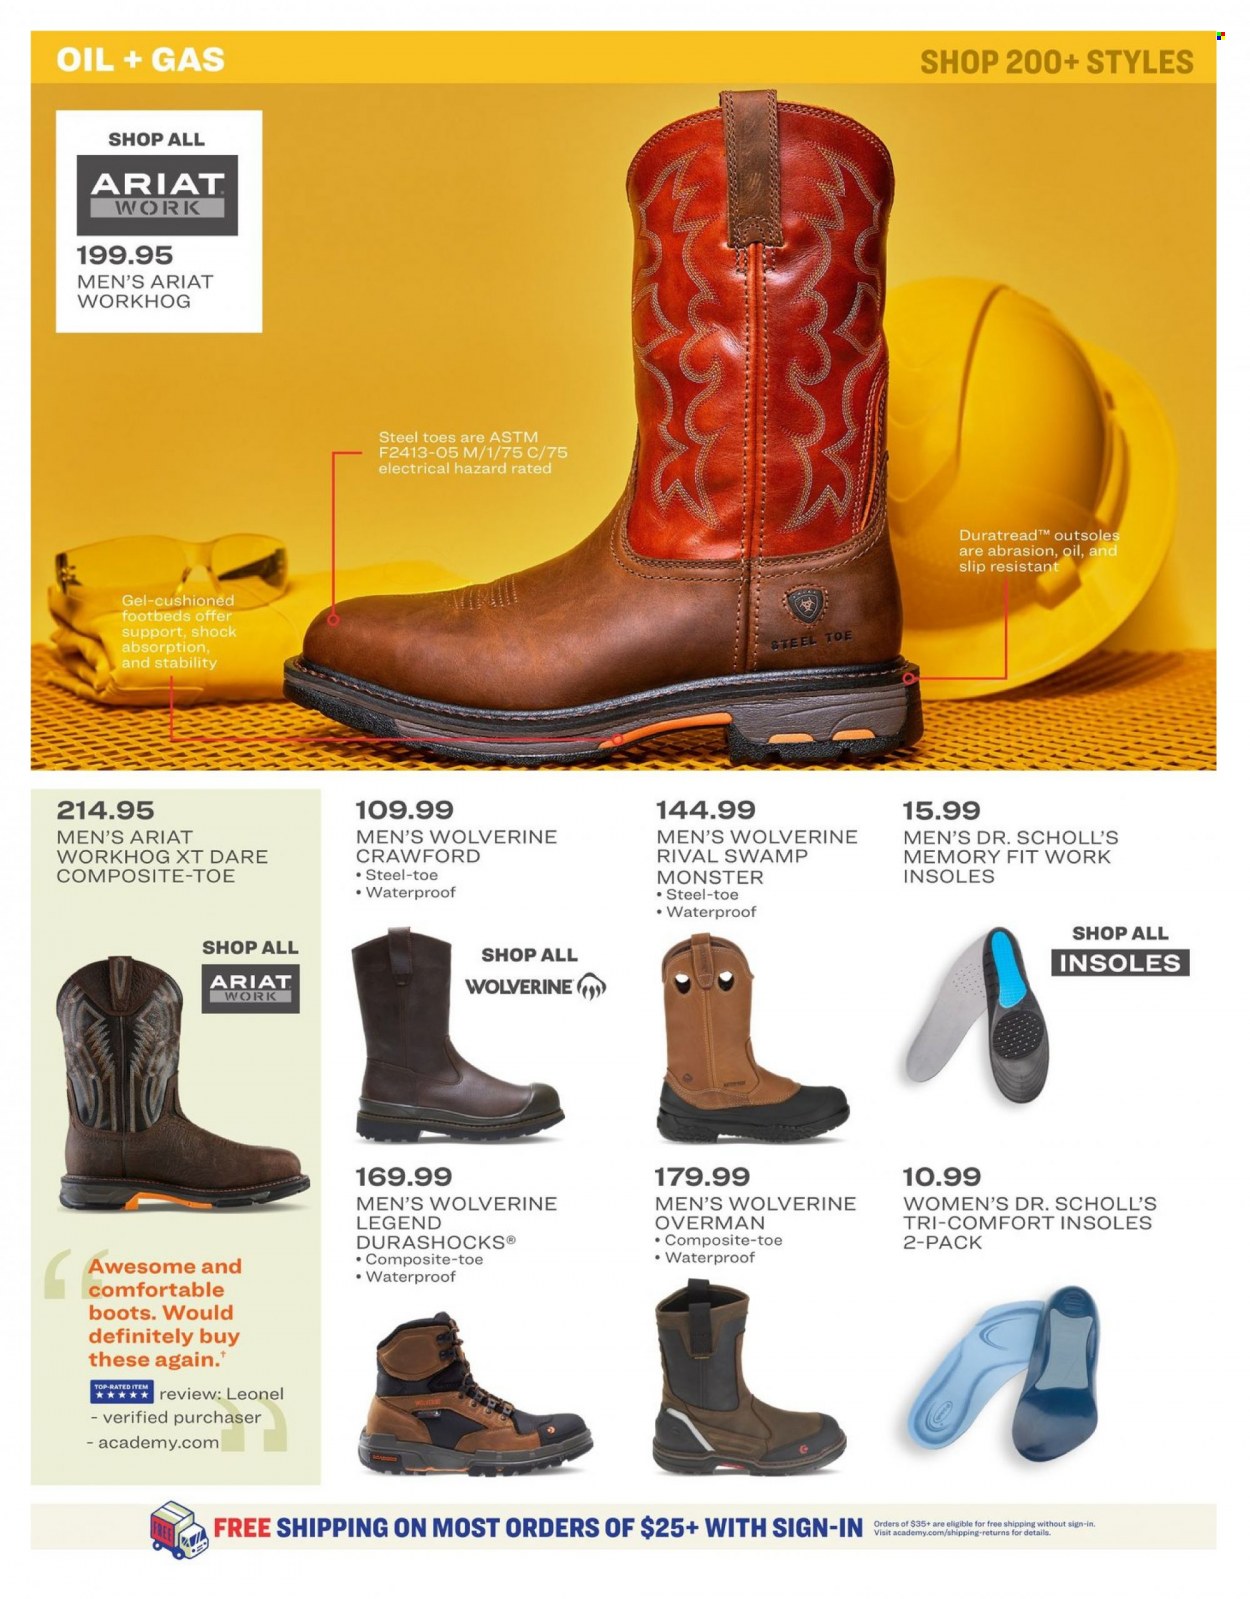 Academy Sports + Outdoors ad  - 09.13.2021 - 10.17.2021.